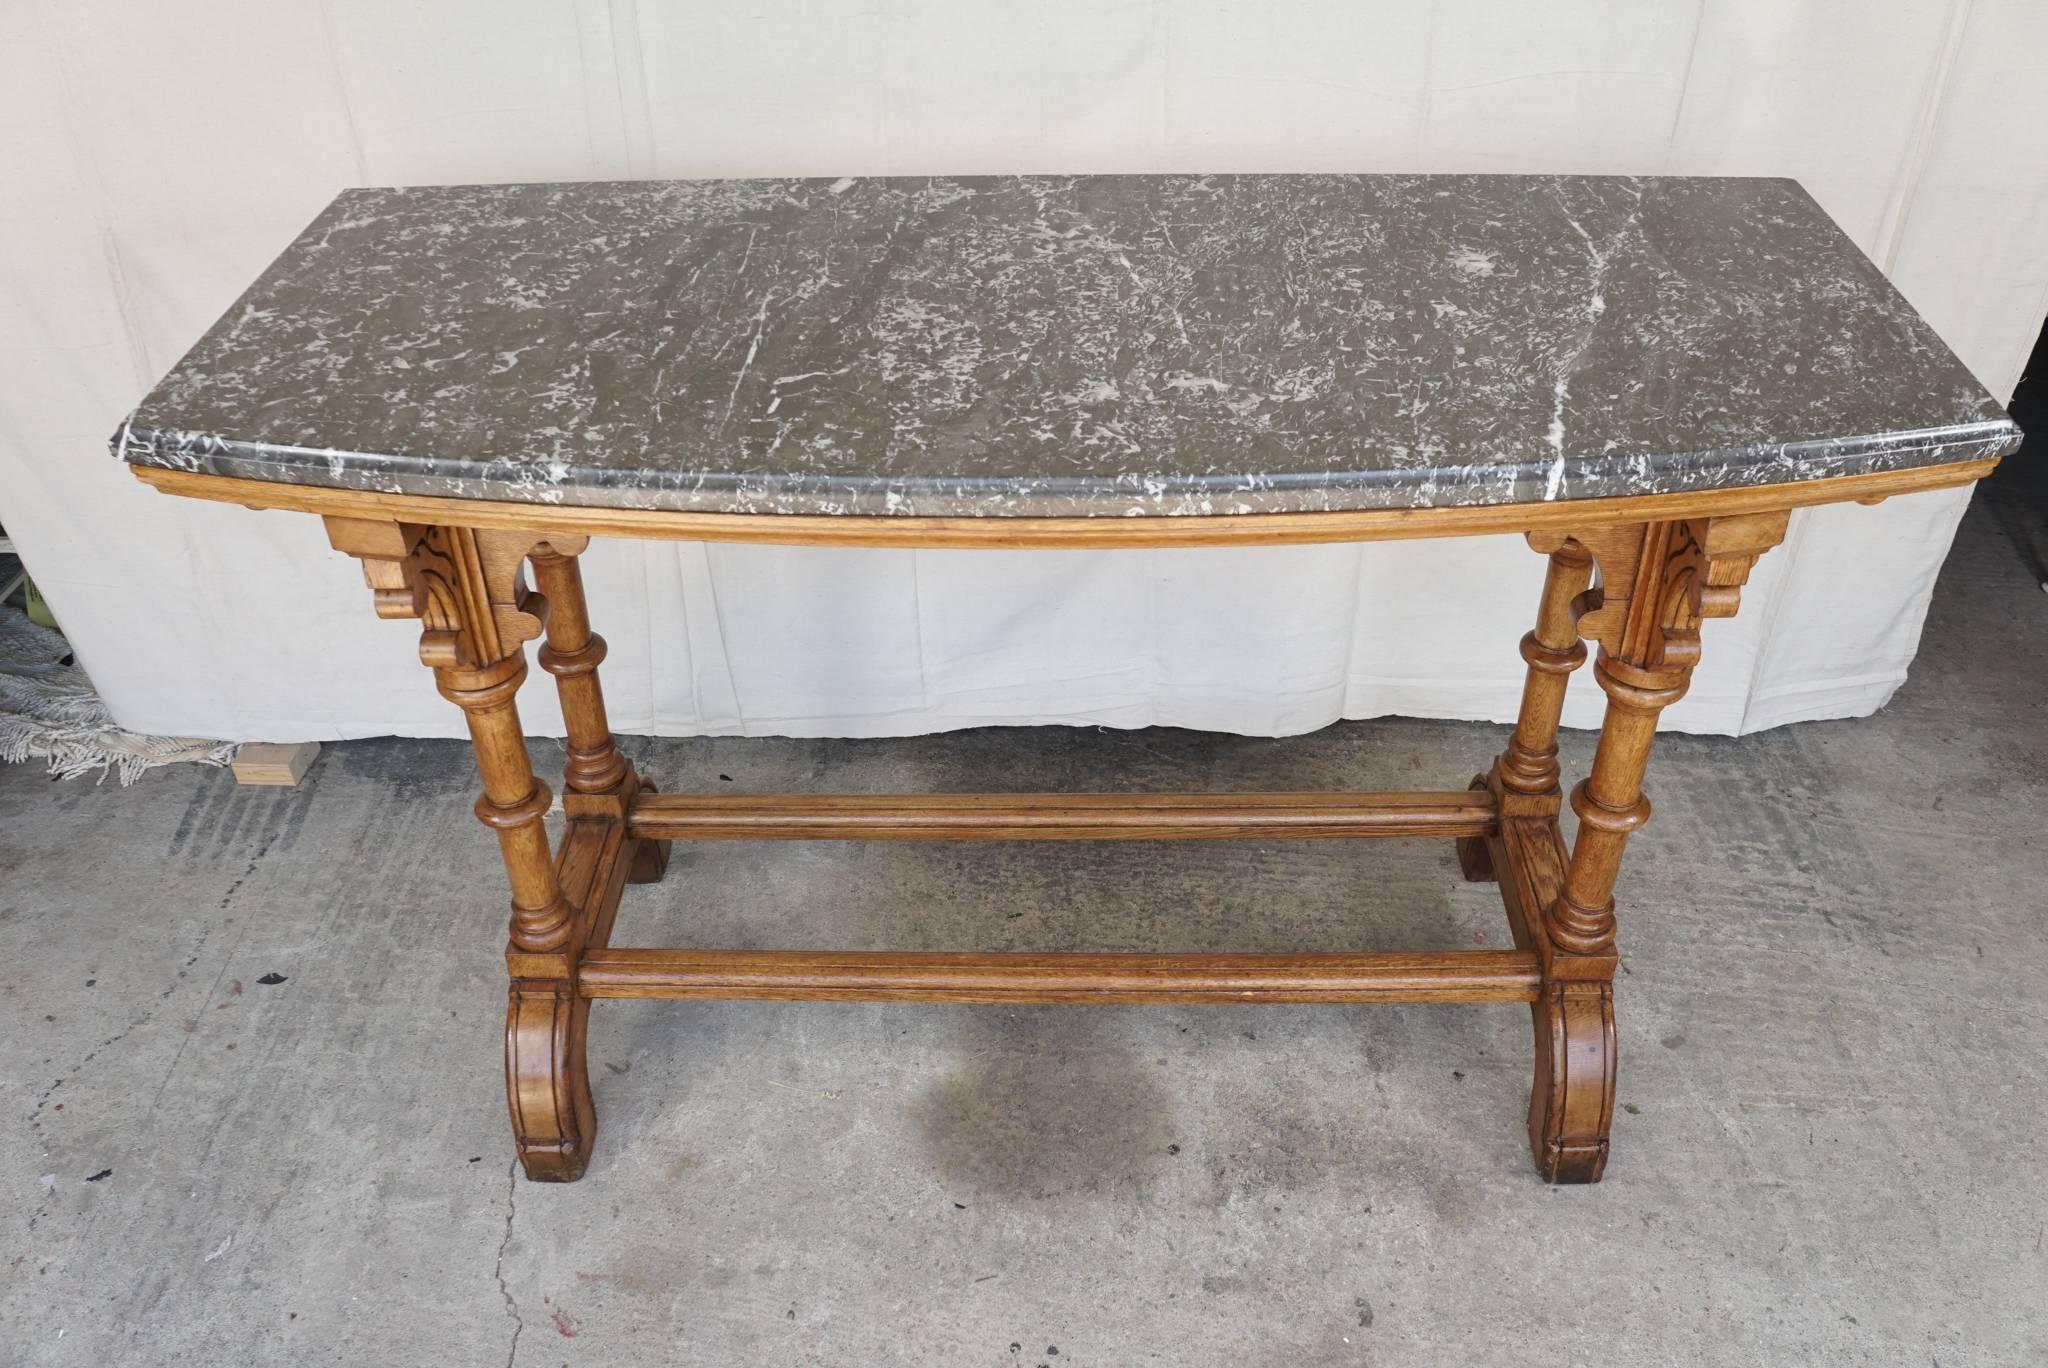 Gothic Revival Pair of 19th Century English Reform Gothic Oak Marble Topped Console Tables